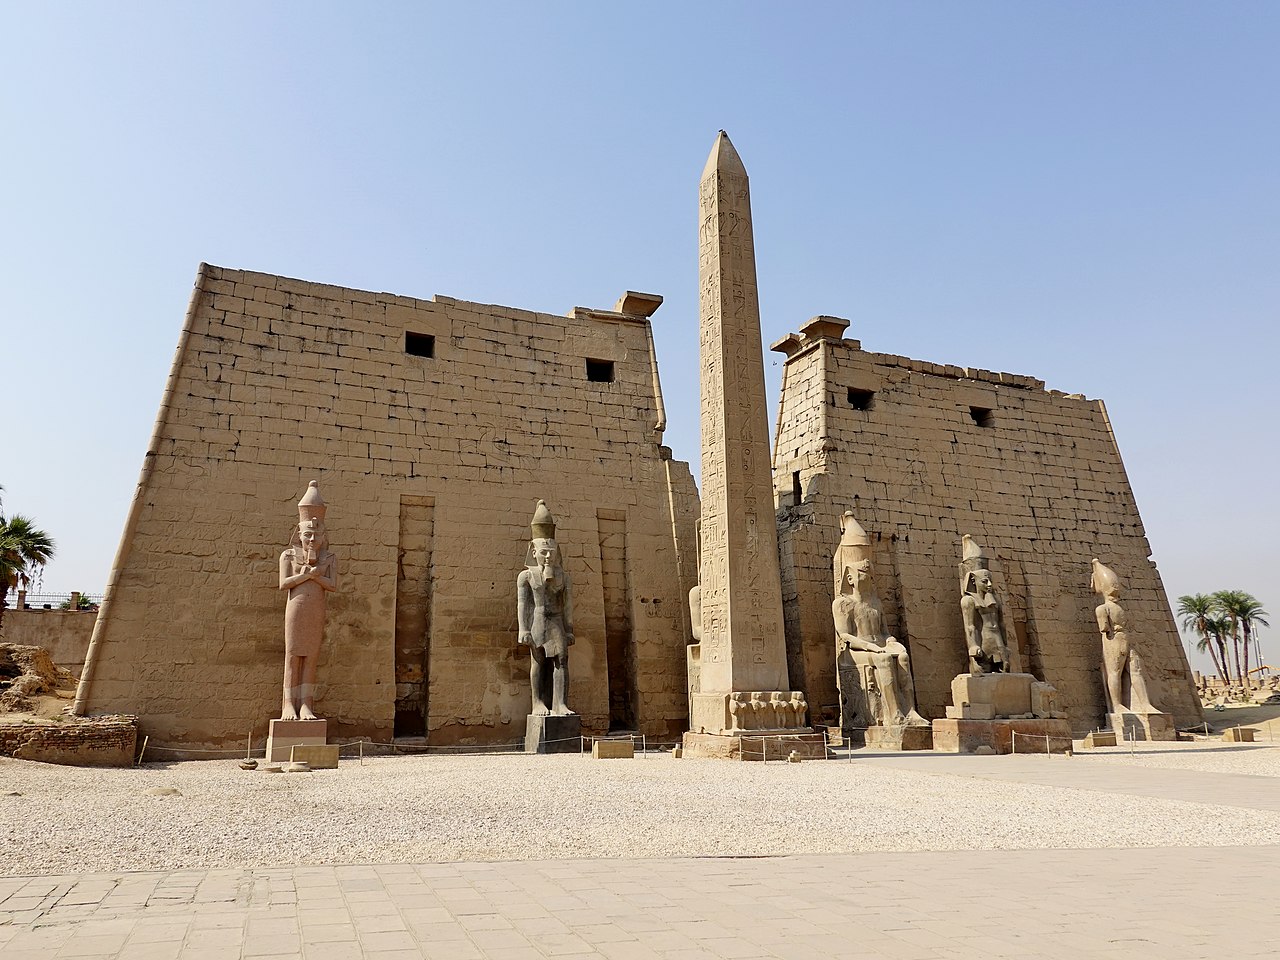 entrance to the luxor temple with massive statues